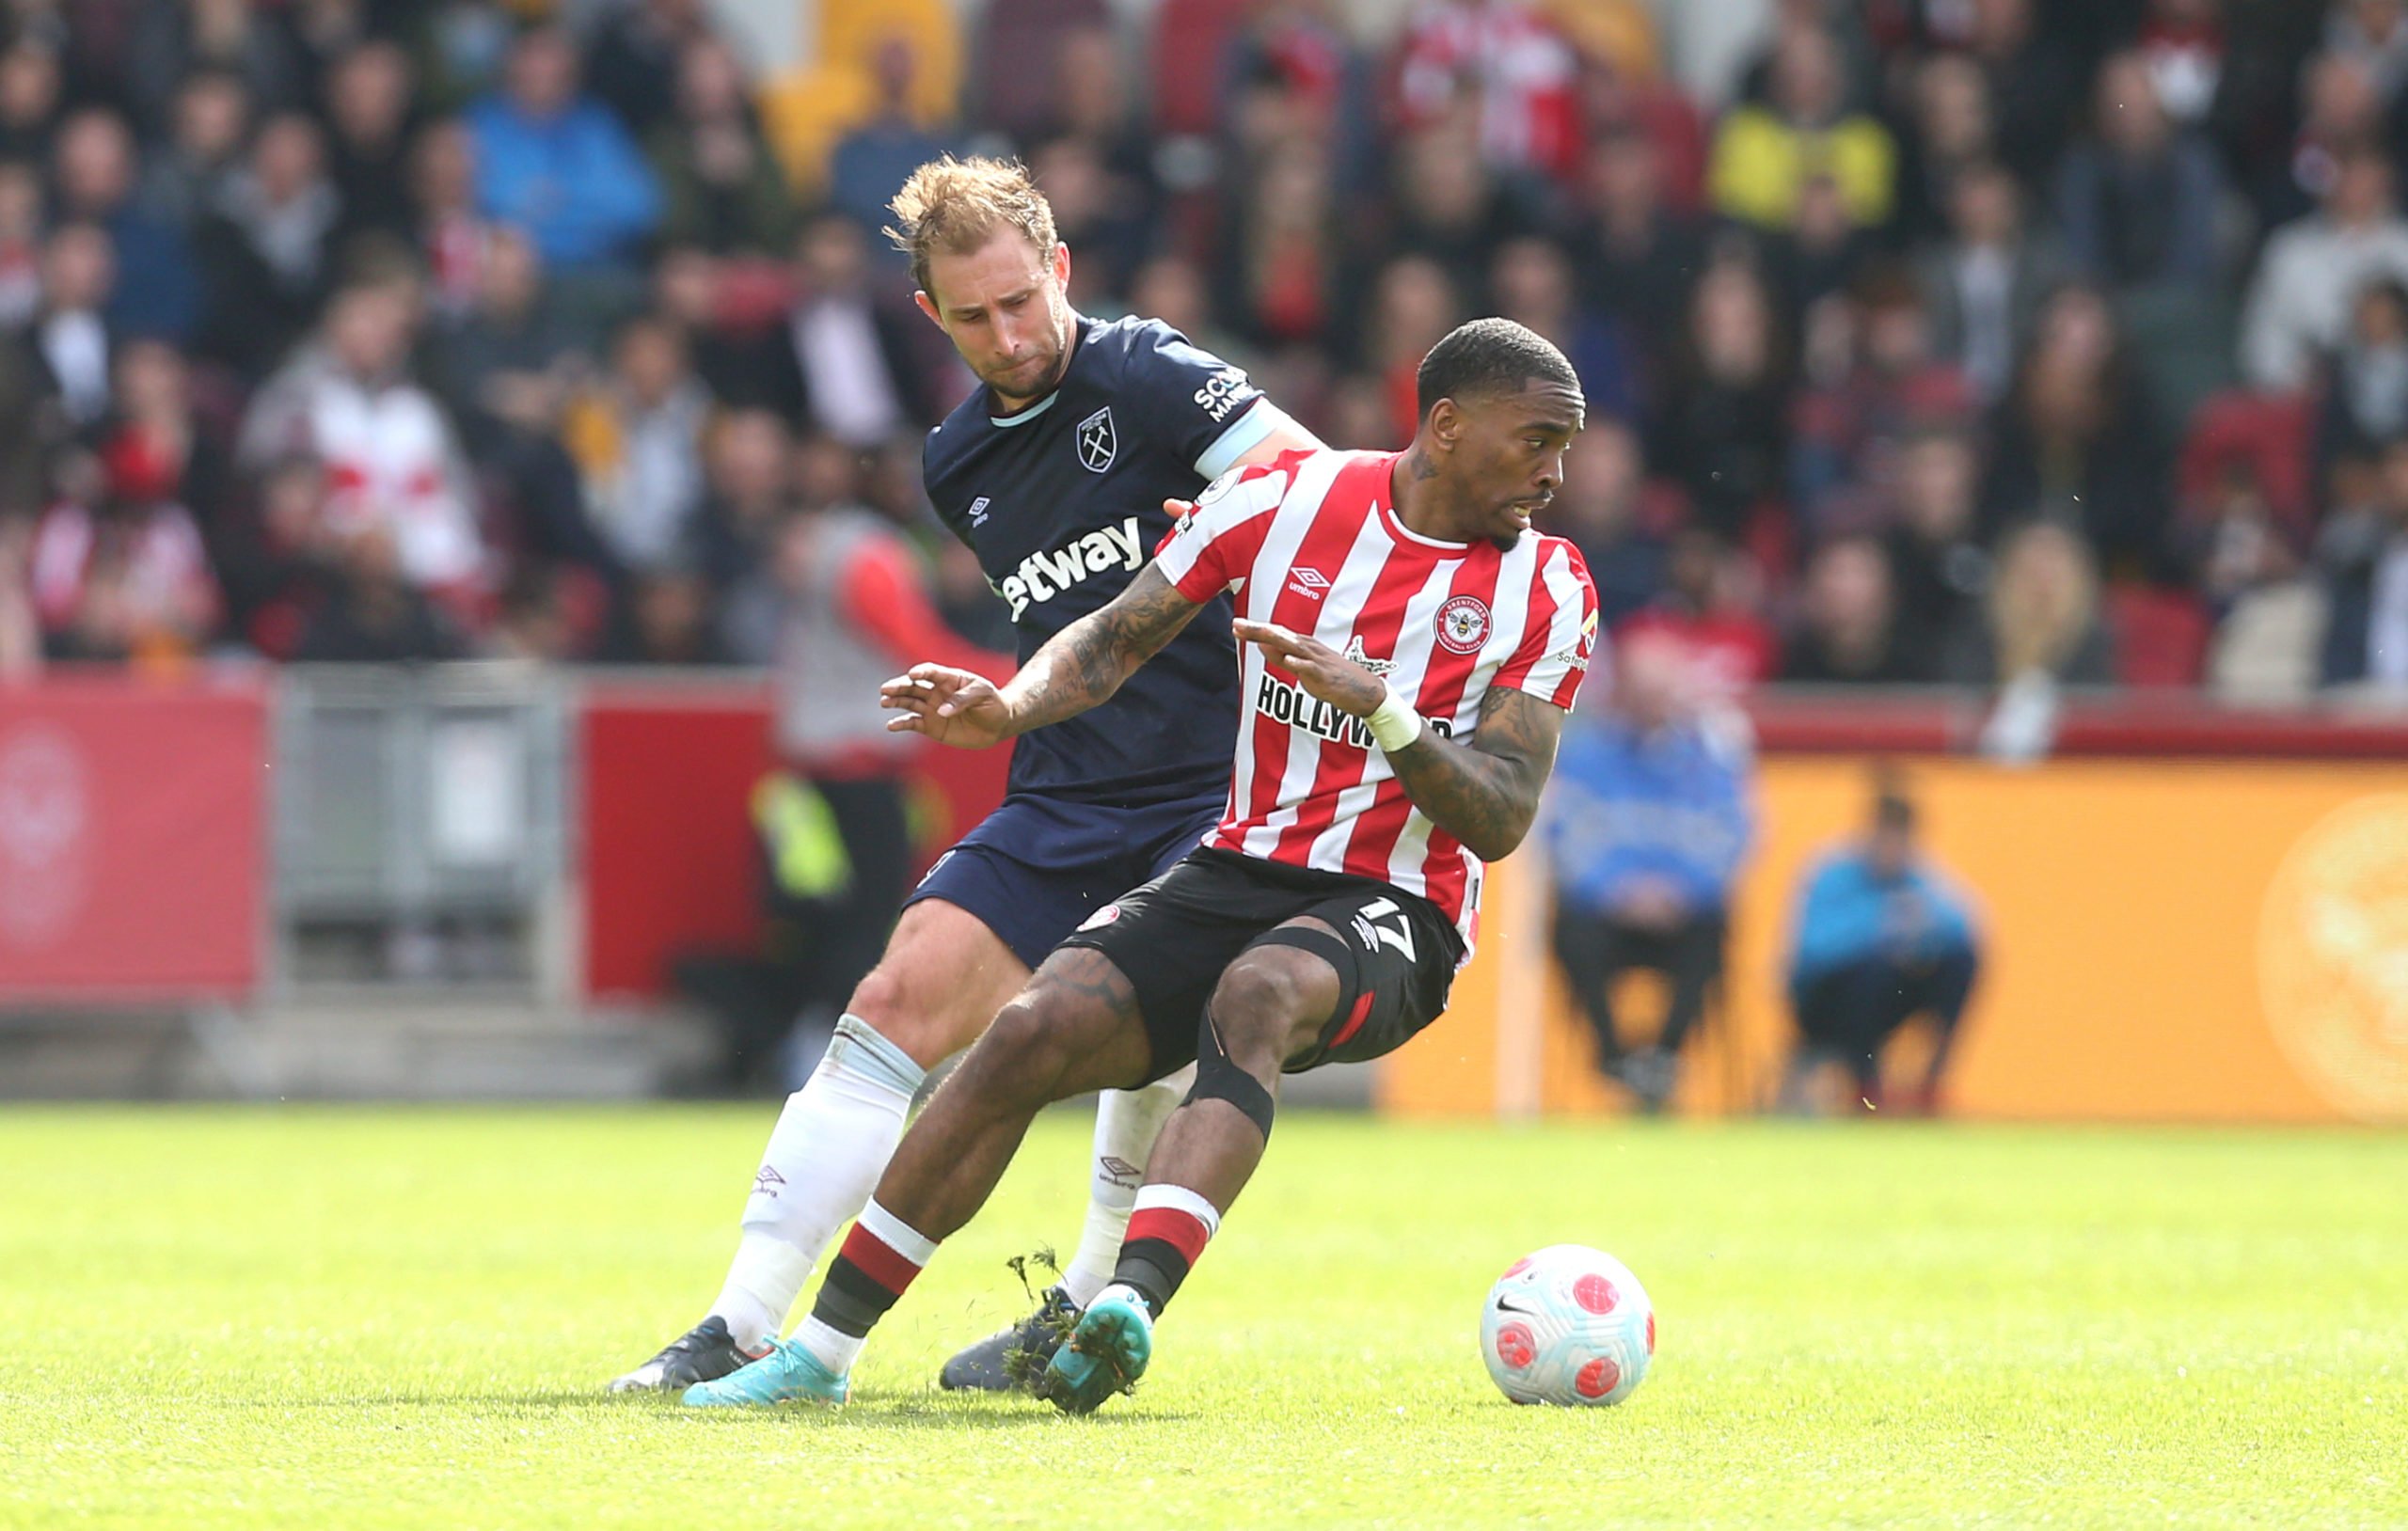 Craig Dawson lifts lid on angry West Ham dressing room after Brentford horror show